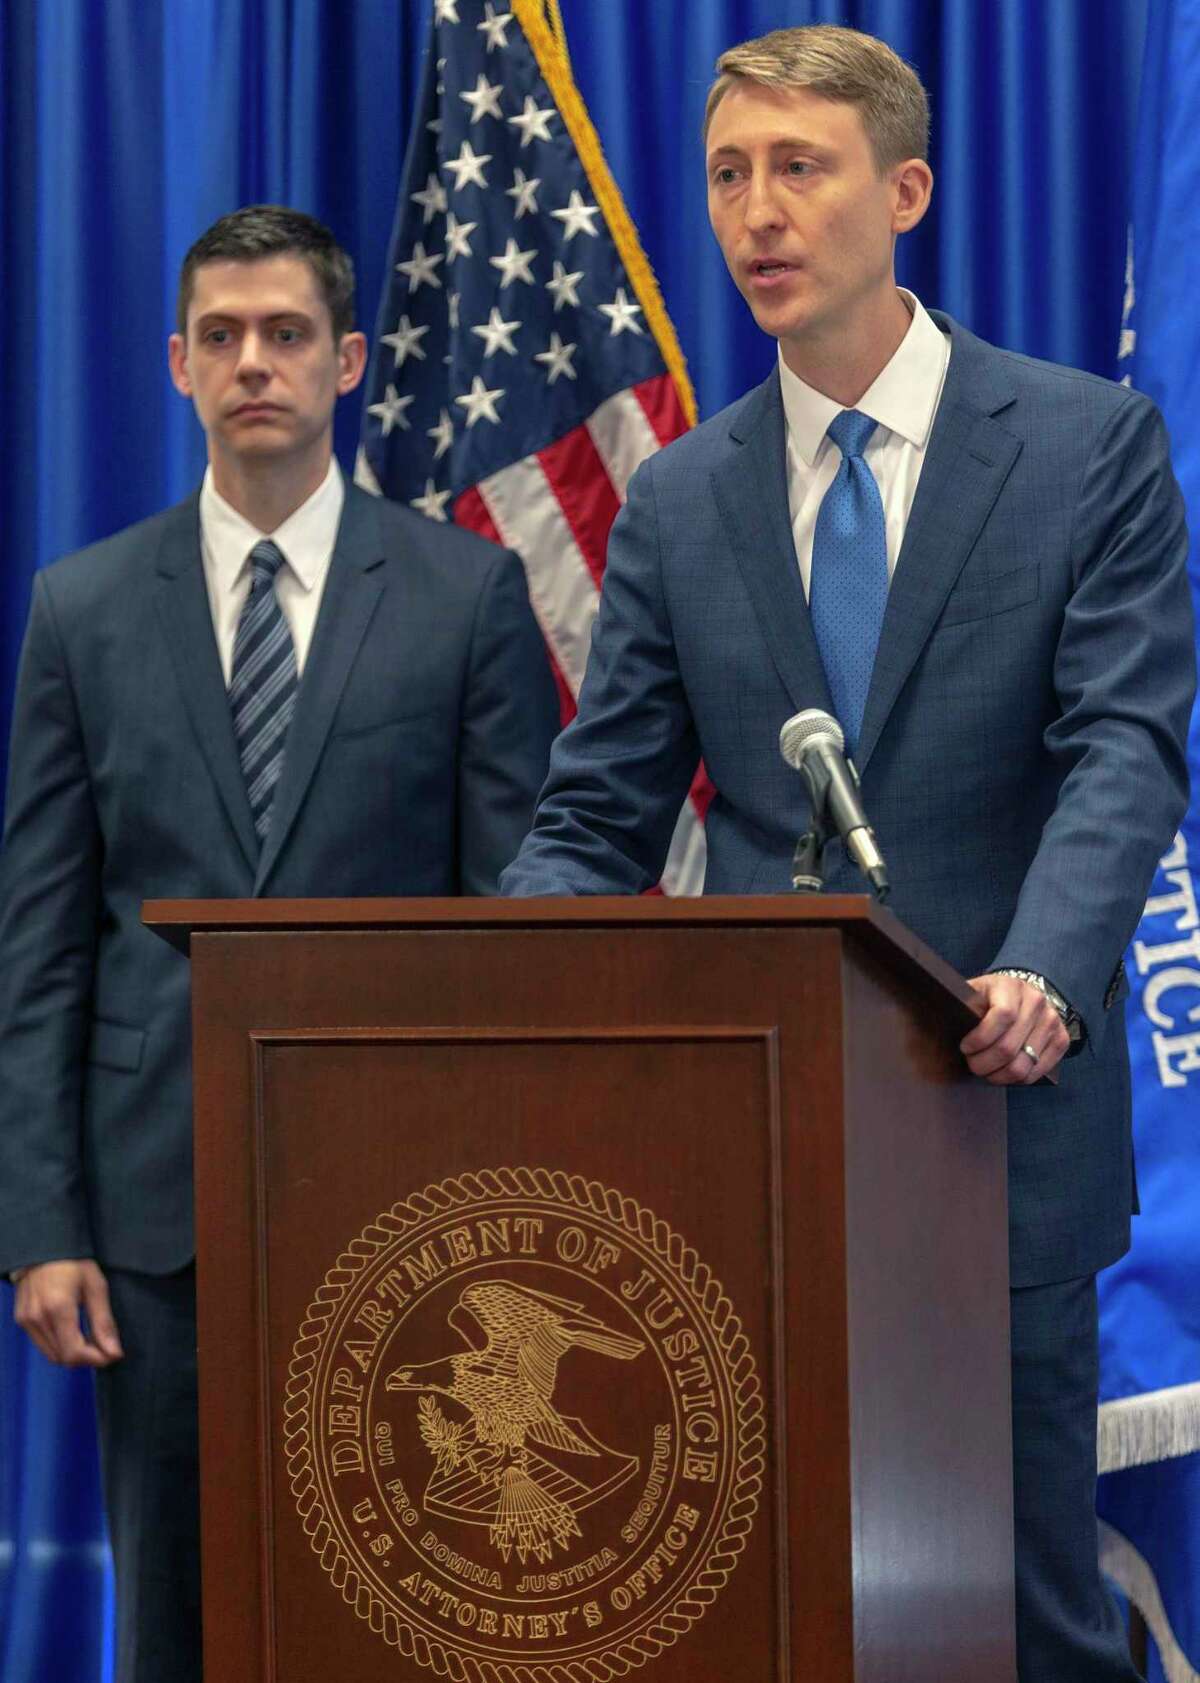 Gus Eyler, right, Director of the Department of Justice Consumer Protection Branch speaks Wednesday, Aug. 21, 2019 about the arrest of five people for allegedly stealing millions of dollars from elderly and disabled veterans in a scheme that used stolen identity information to access Department of Defense and Veteran Affairs benefit websites. John F. Bash, left, U.S. Attorney for the Western District of Texas, also spoke during the press conference.